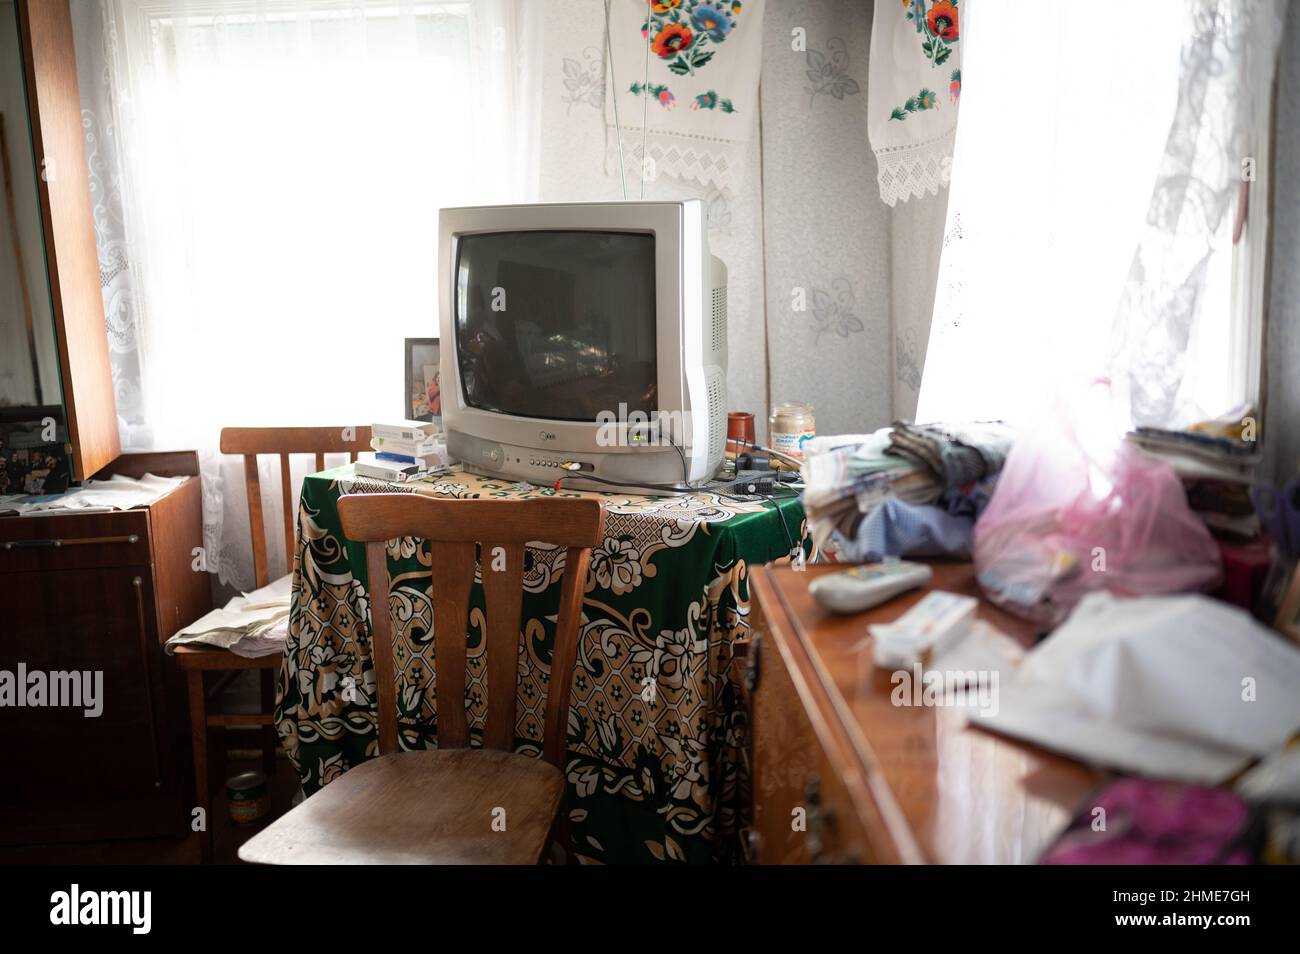 Inside the home of Baba Gania, one of the most famous Chernobyl resettlers, in Kupovate, Ukraine near the Chernobyl Nuclear Power Plant. Stock Photo